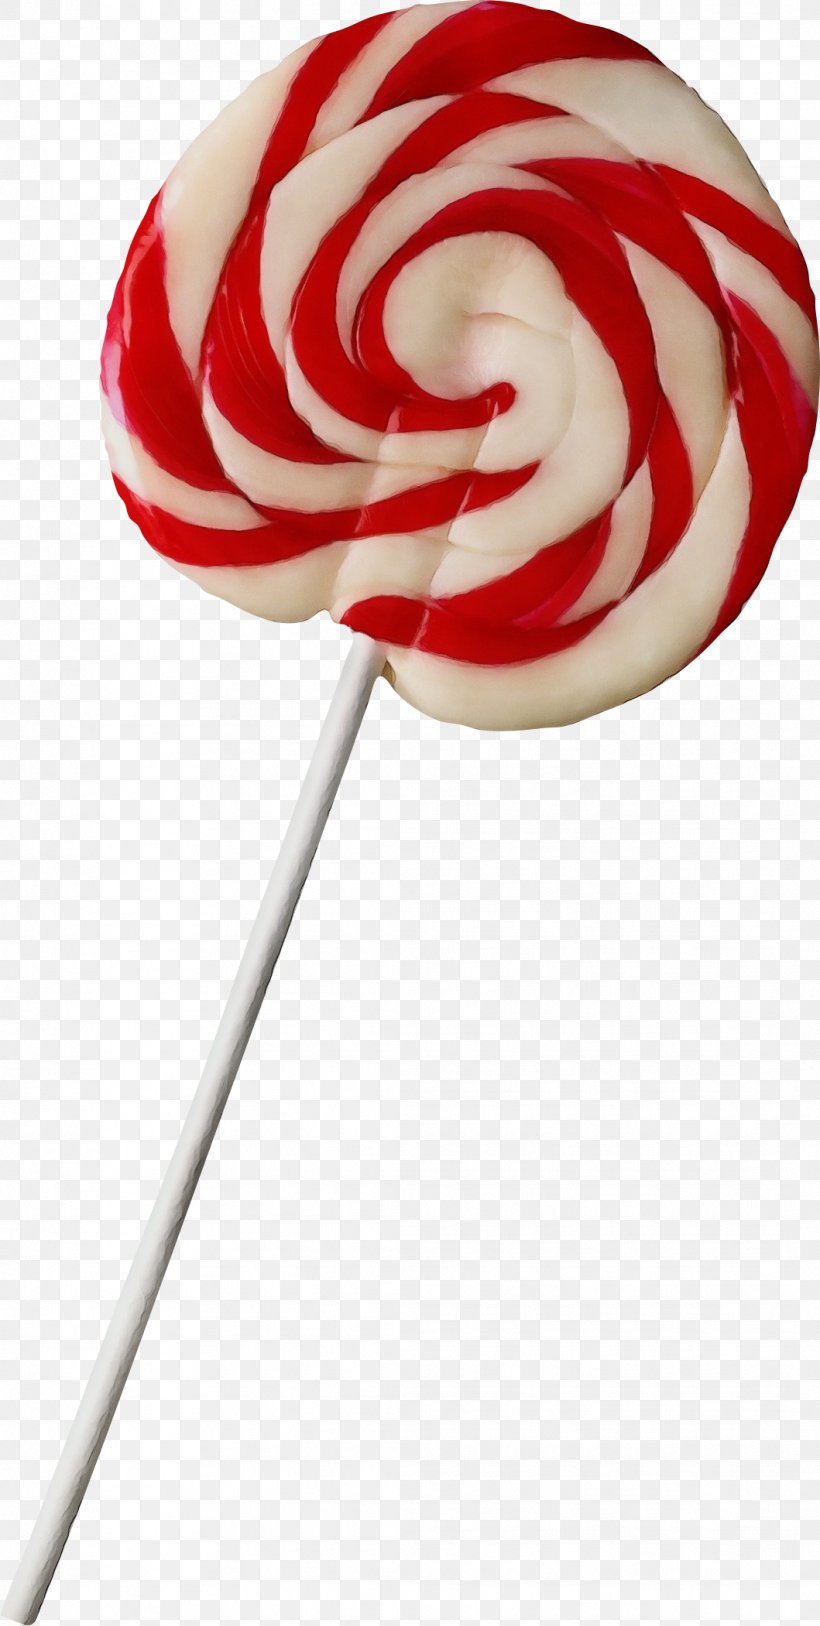 Lollipop Cartoon, PNG, 1059x2101px, Watercolor, Candy, Candy Apple, Chupa Chups, Confectionery Download Free